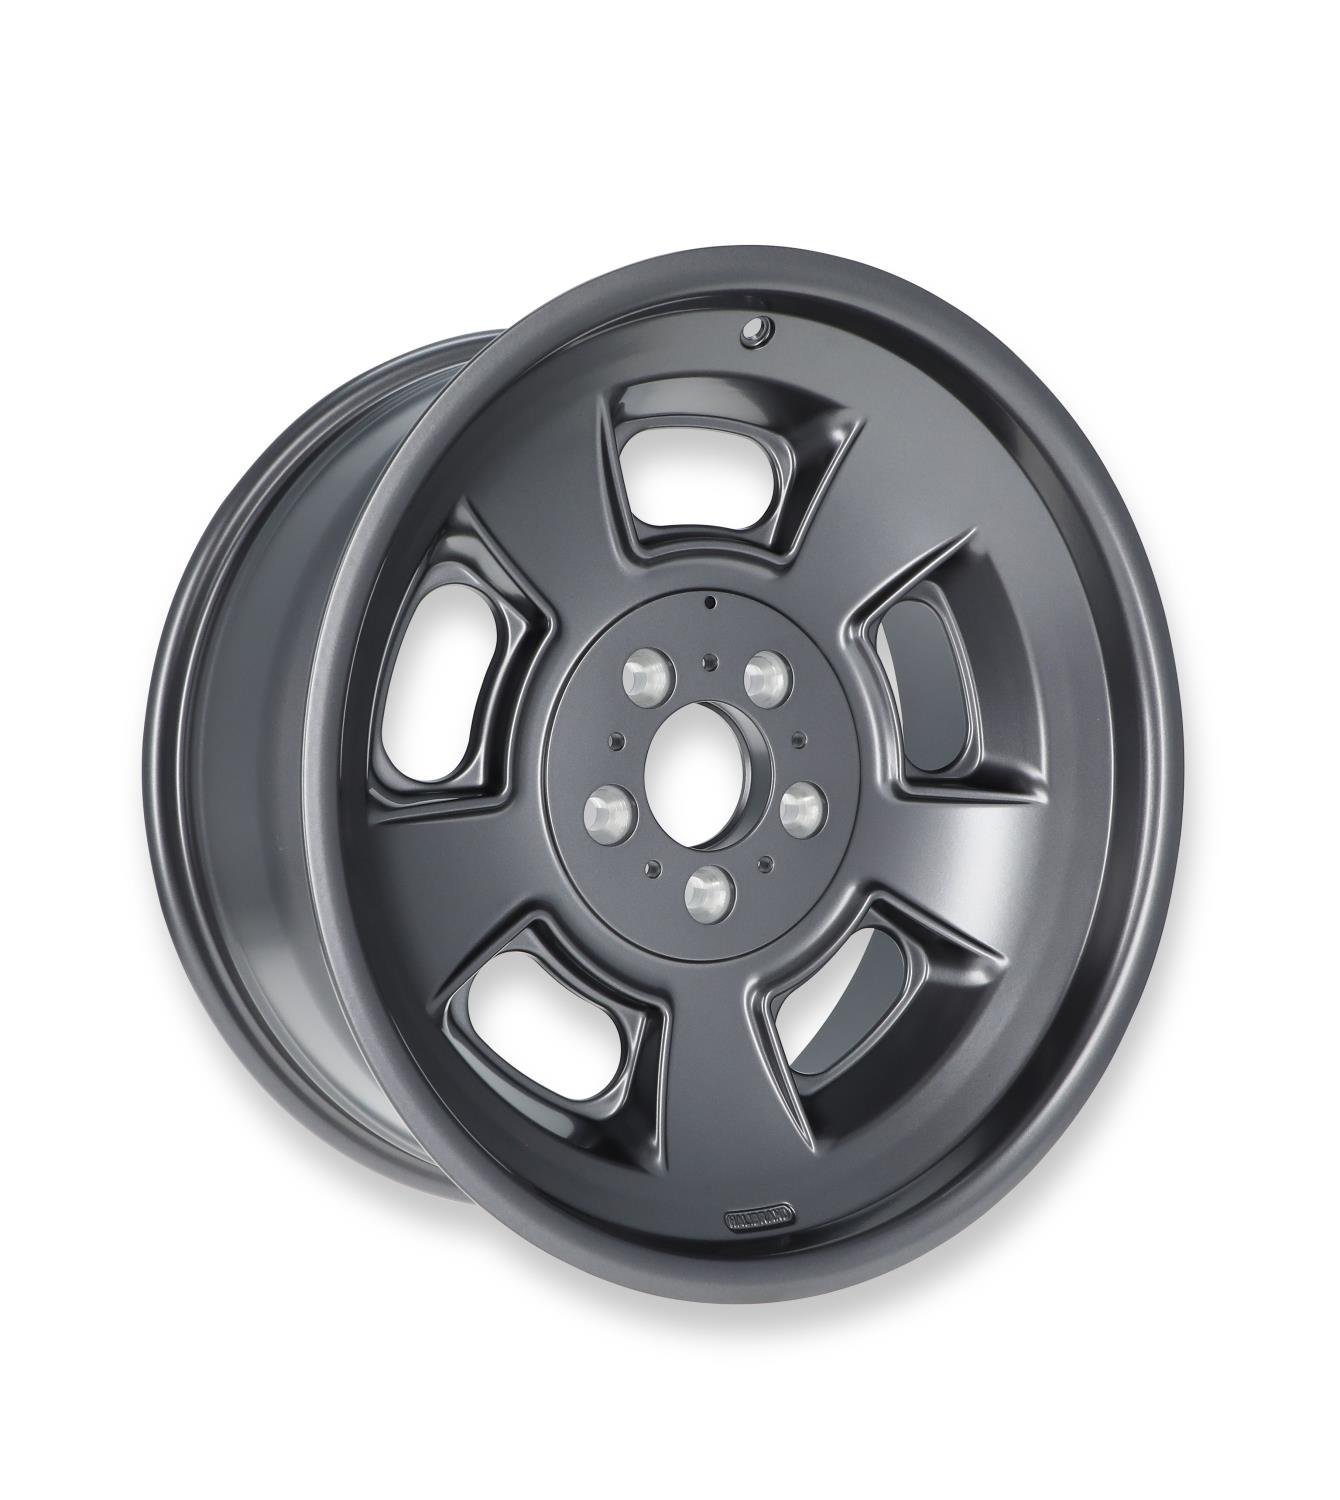 Sprint Front Wheel, Size: 19x8.5", Bolt Pattern: 5x5", Backspace: 4.75", Anthracite - Semi Gloss Clearcoat]